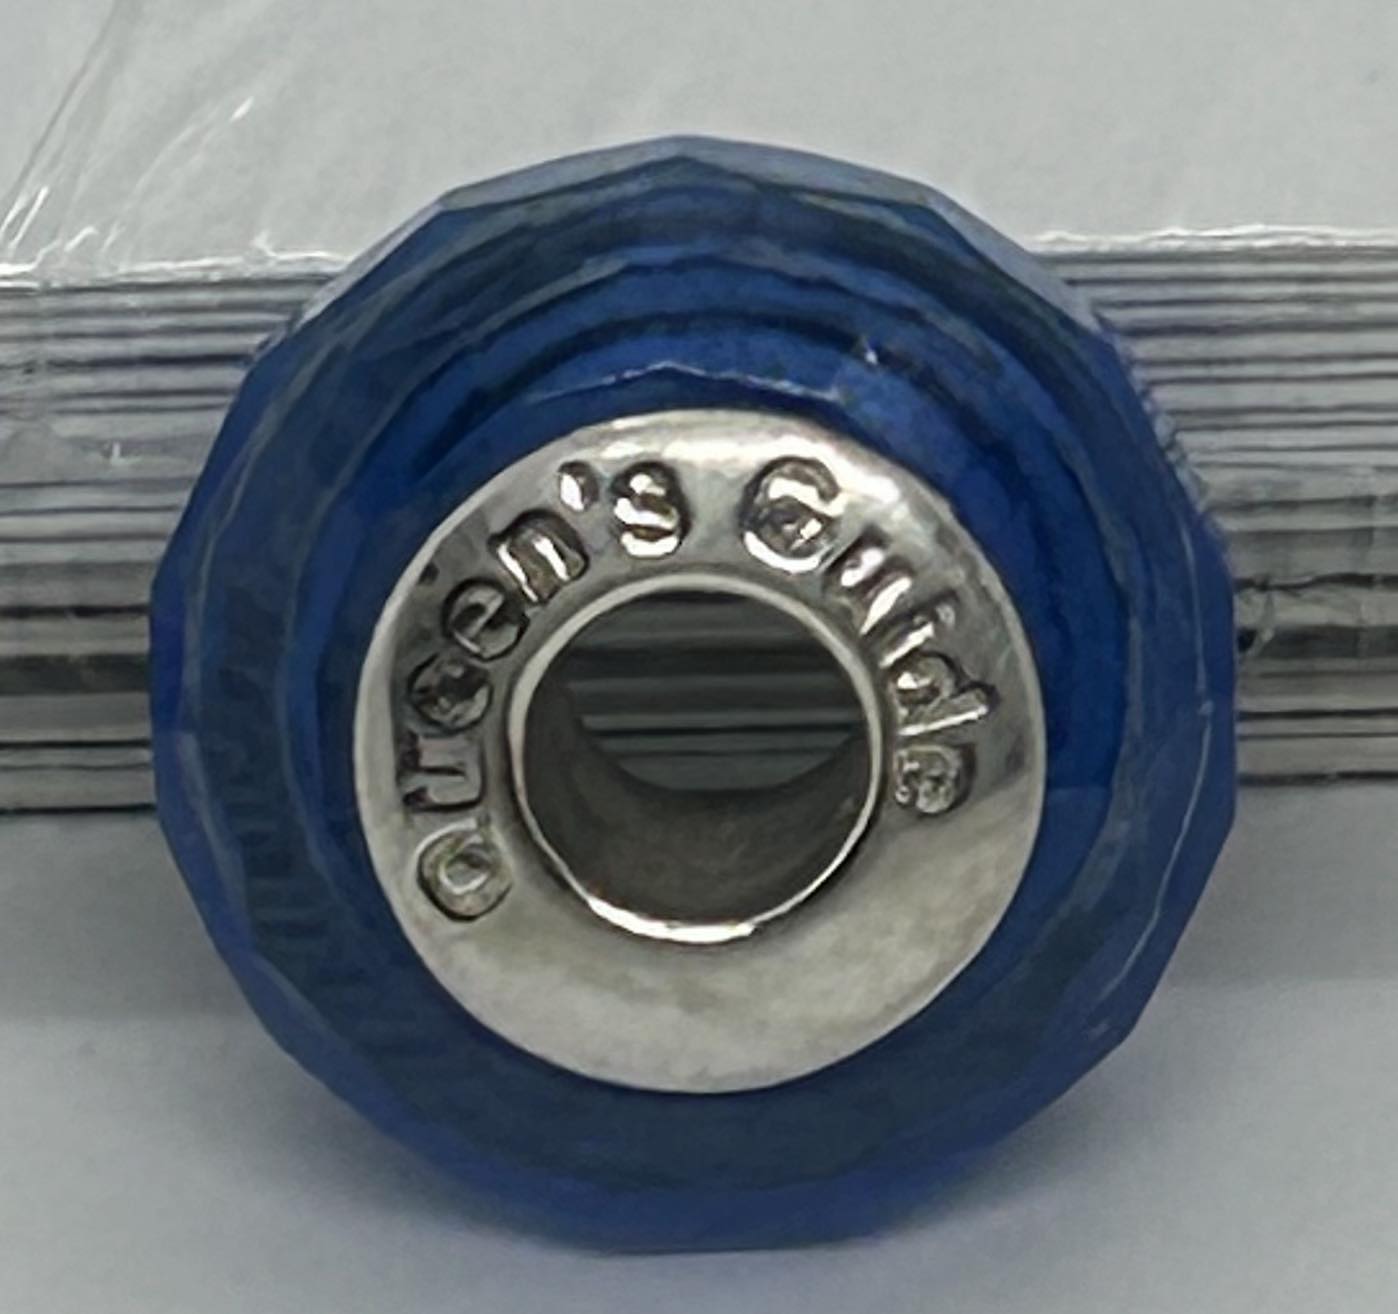 a blue pandora like charm with queen's guide stamped on the metal centre